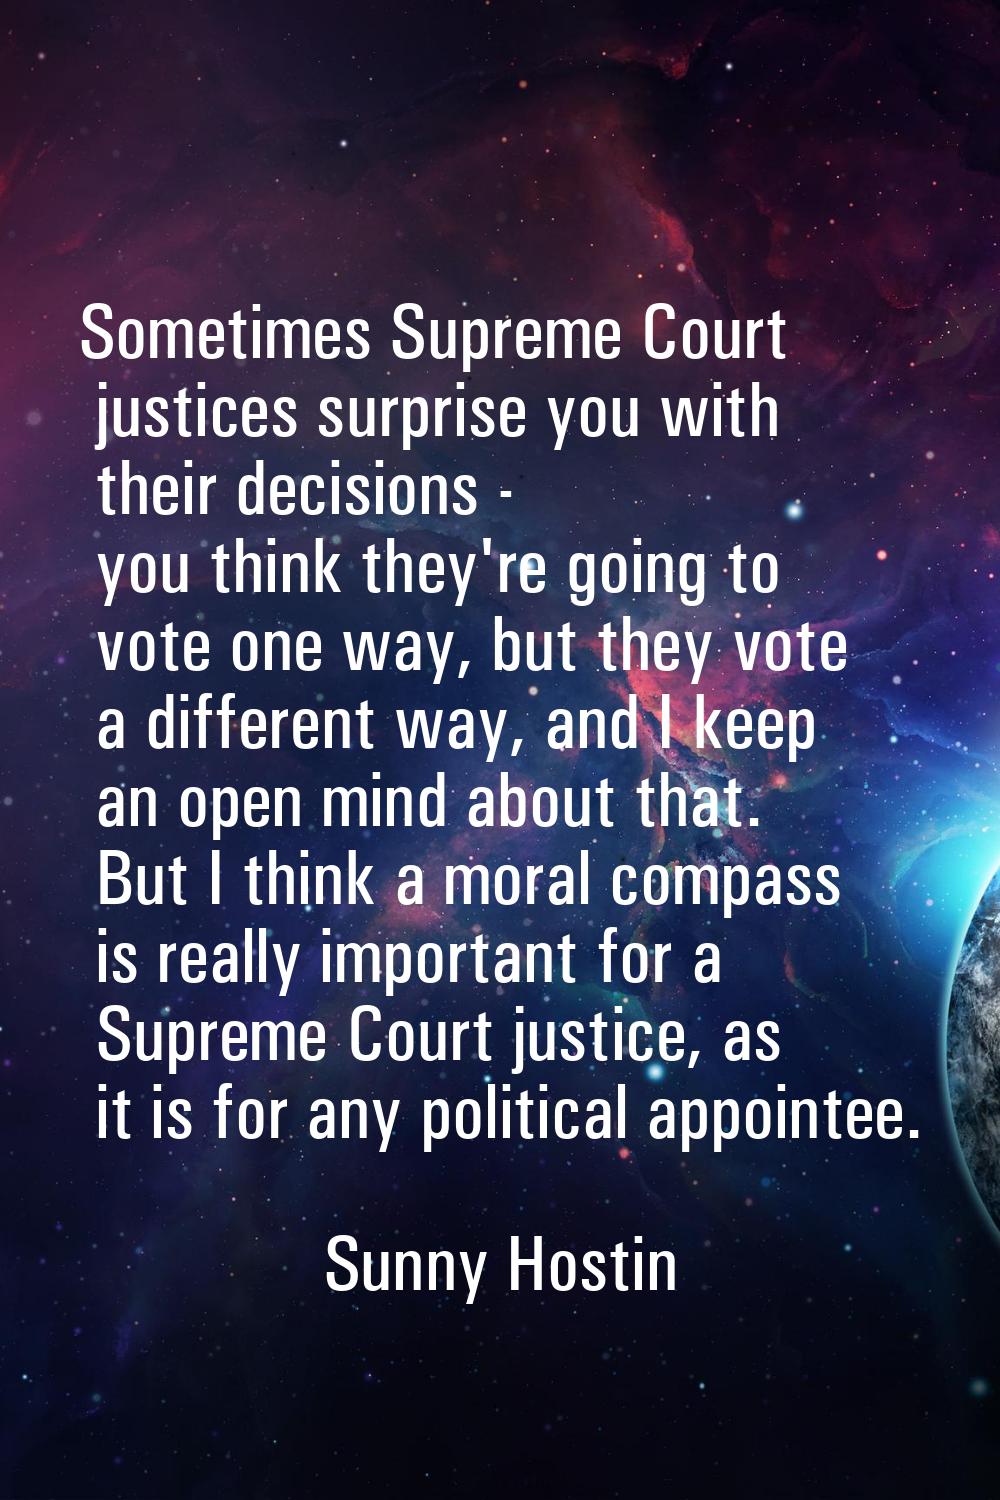 Sometimes Supreme Court justices surprise you with their decisions - you think they're going to vot